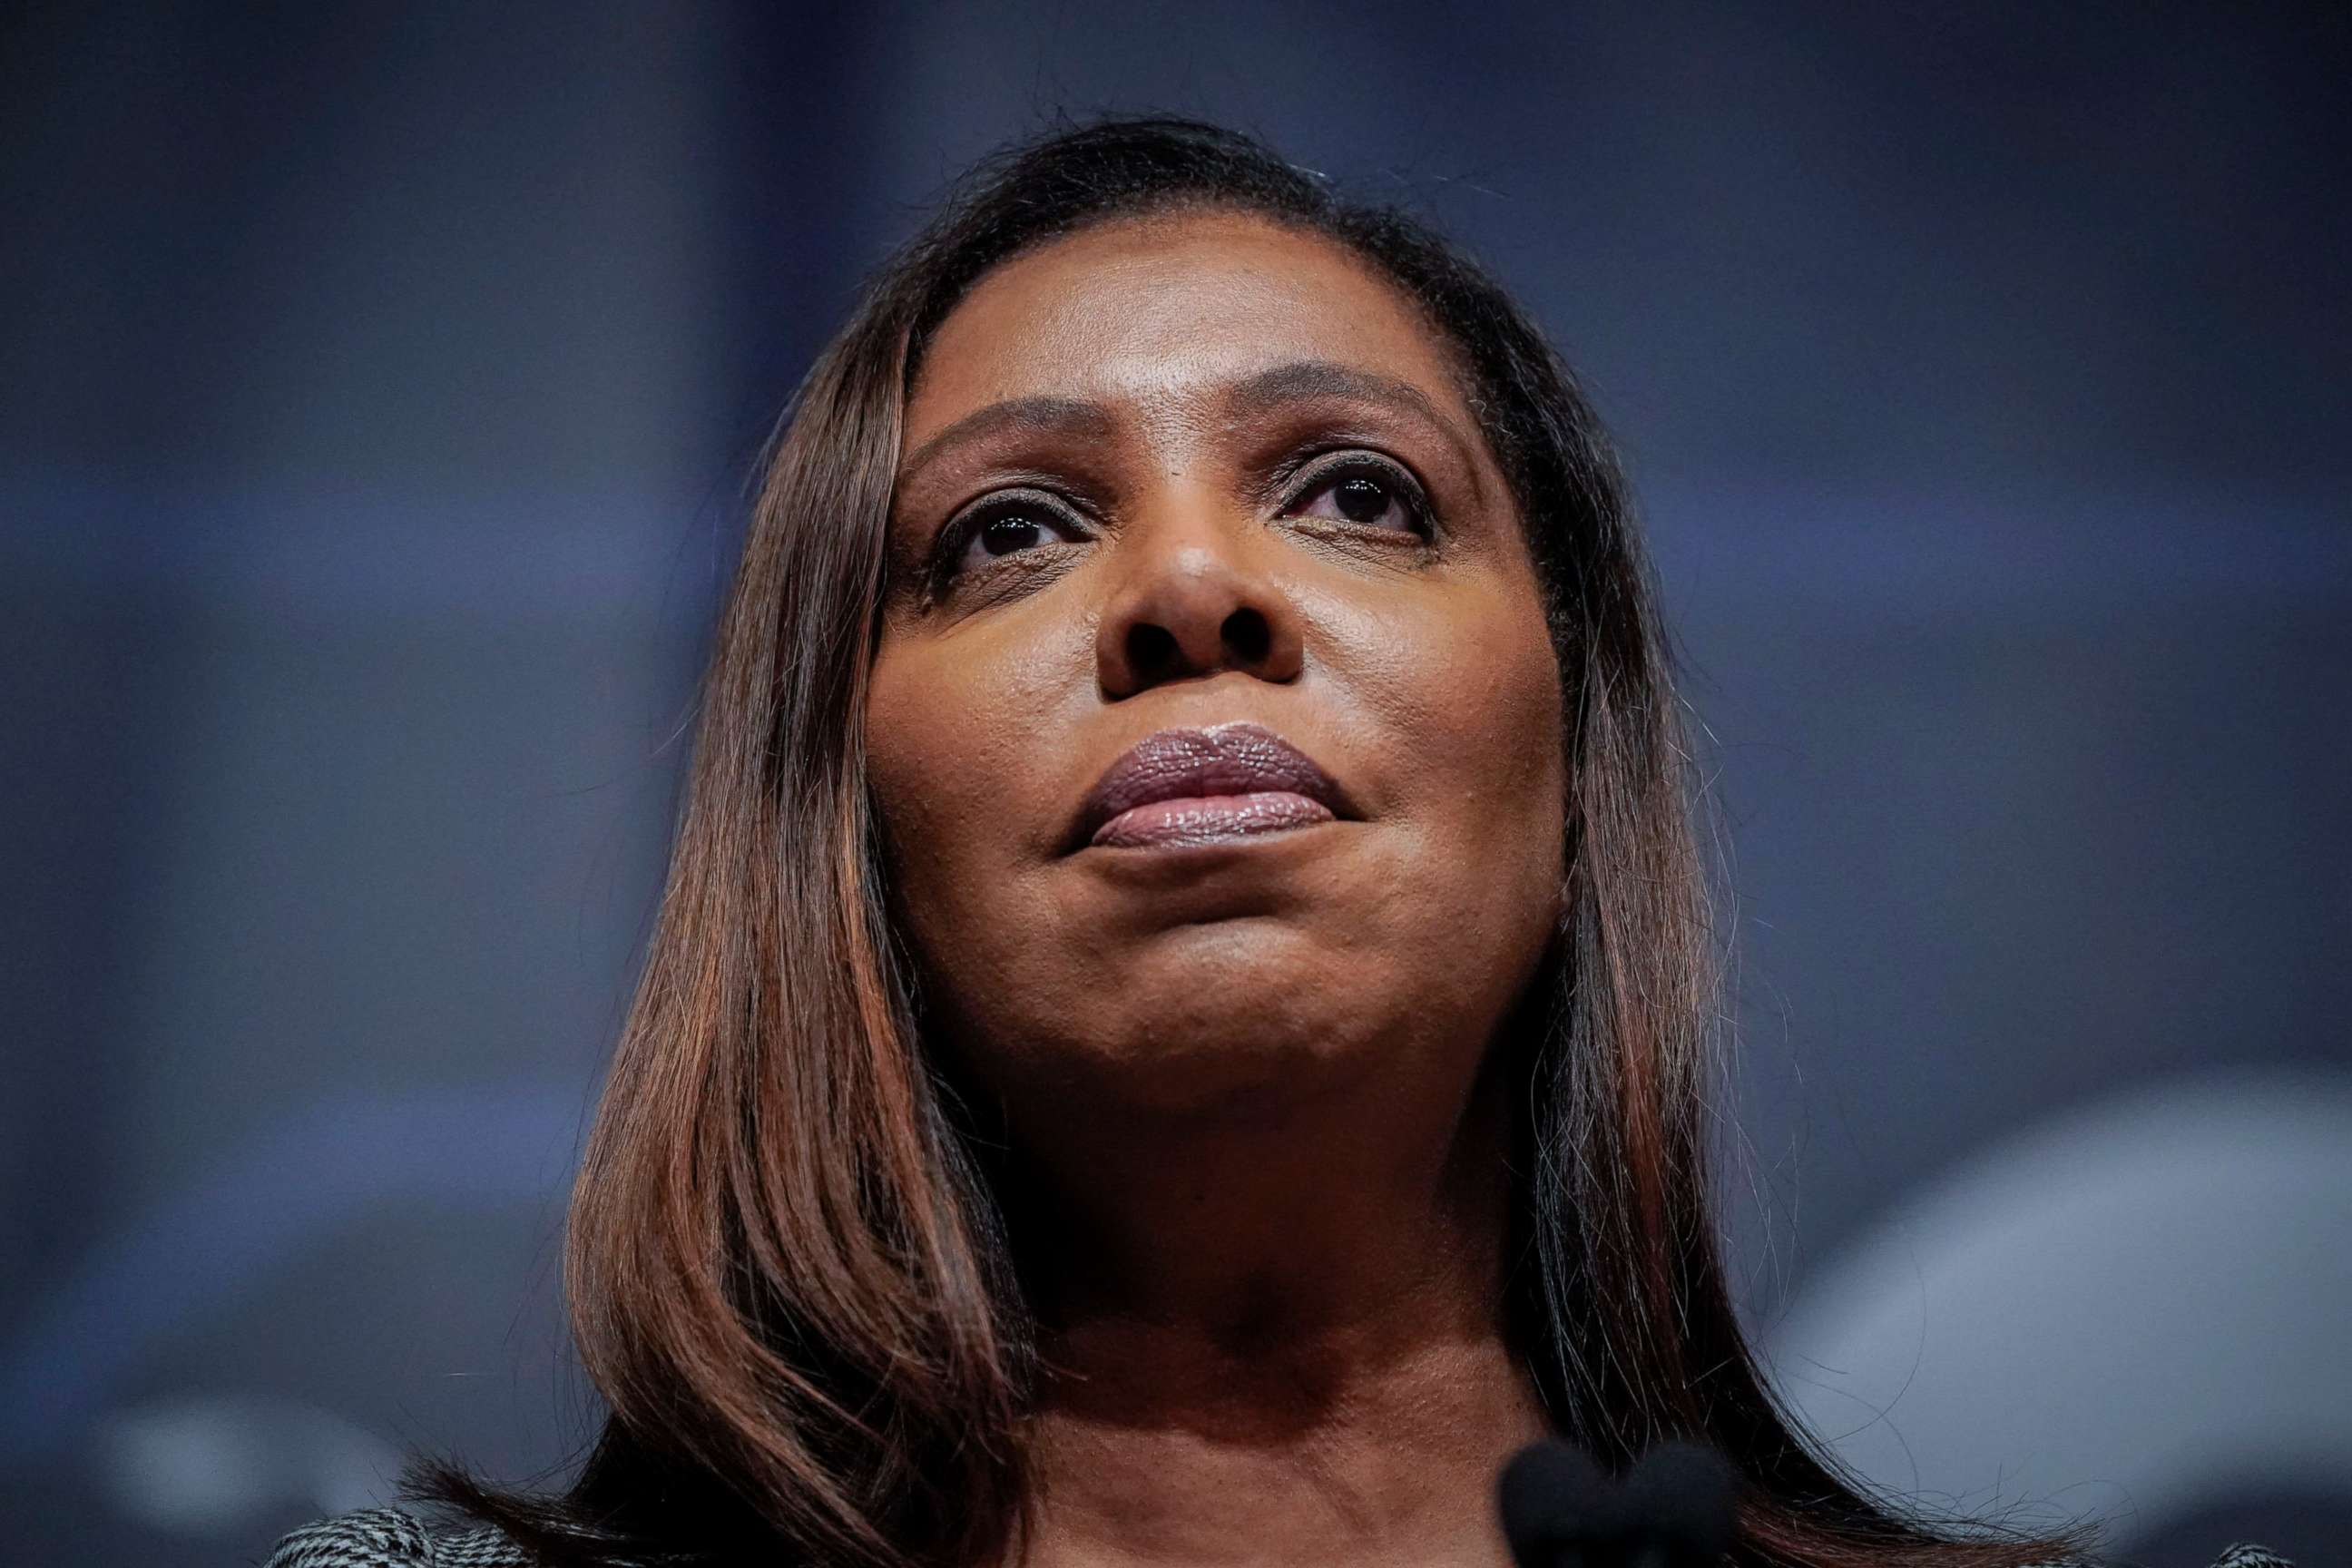 PHOTO: New York State Attorney General Letitia James speaks during the New York State Democratic Convention in New York, Feb. 17, 2022.